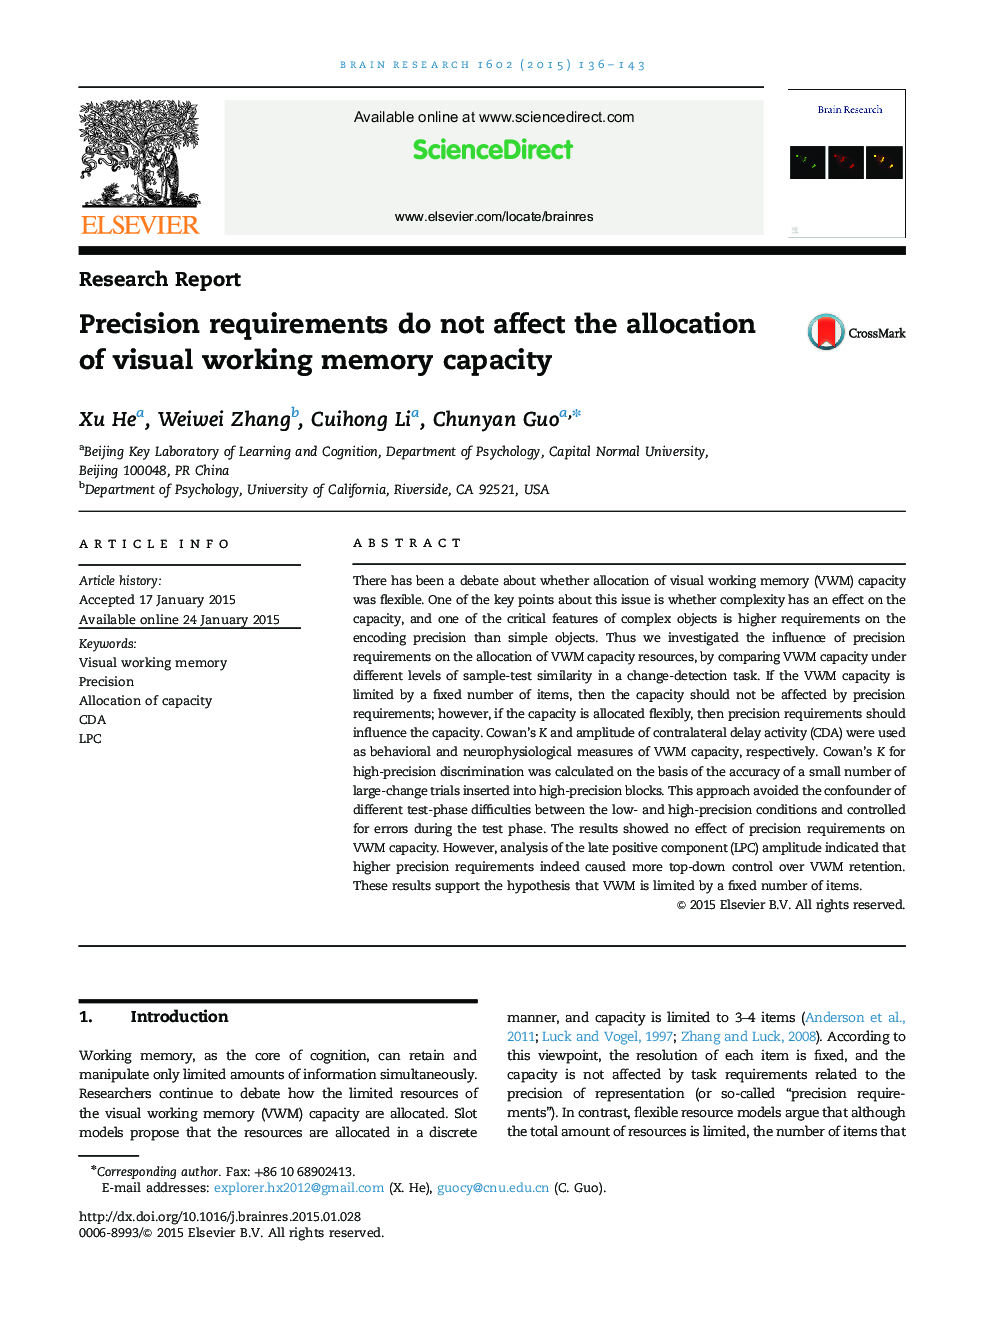 Precision requirements do not affect the allocation of visual working memory capacity